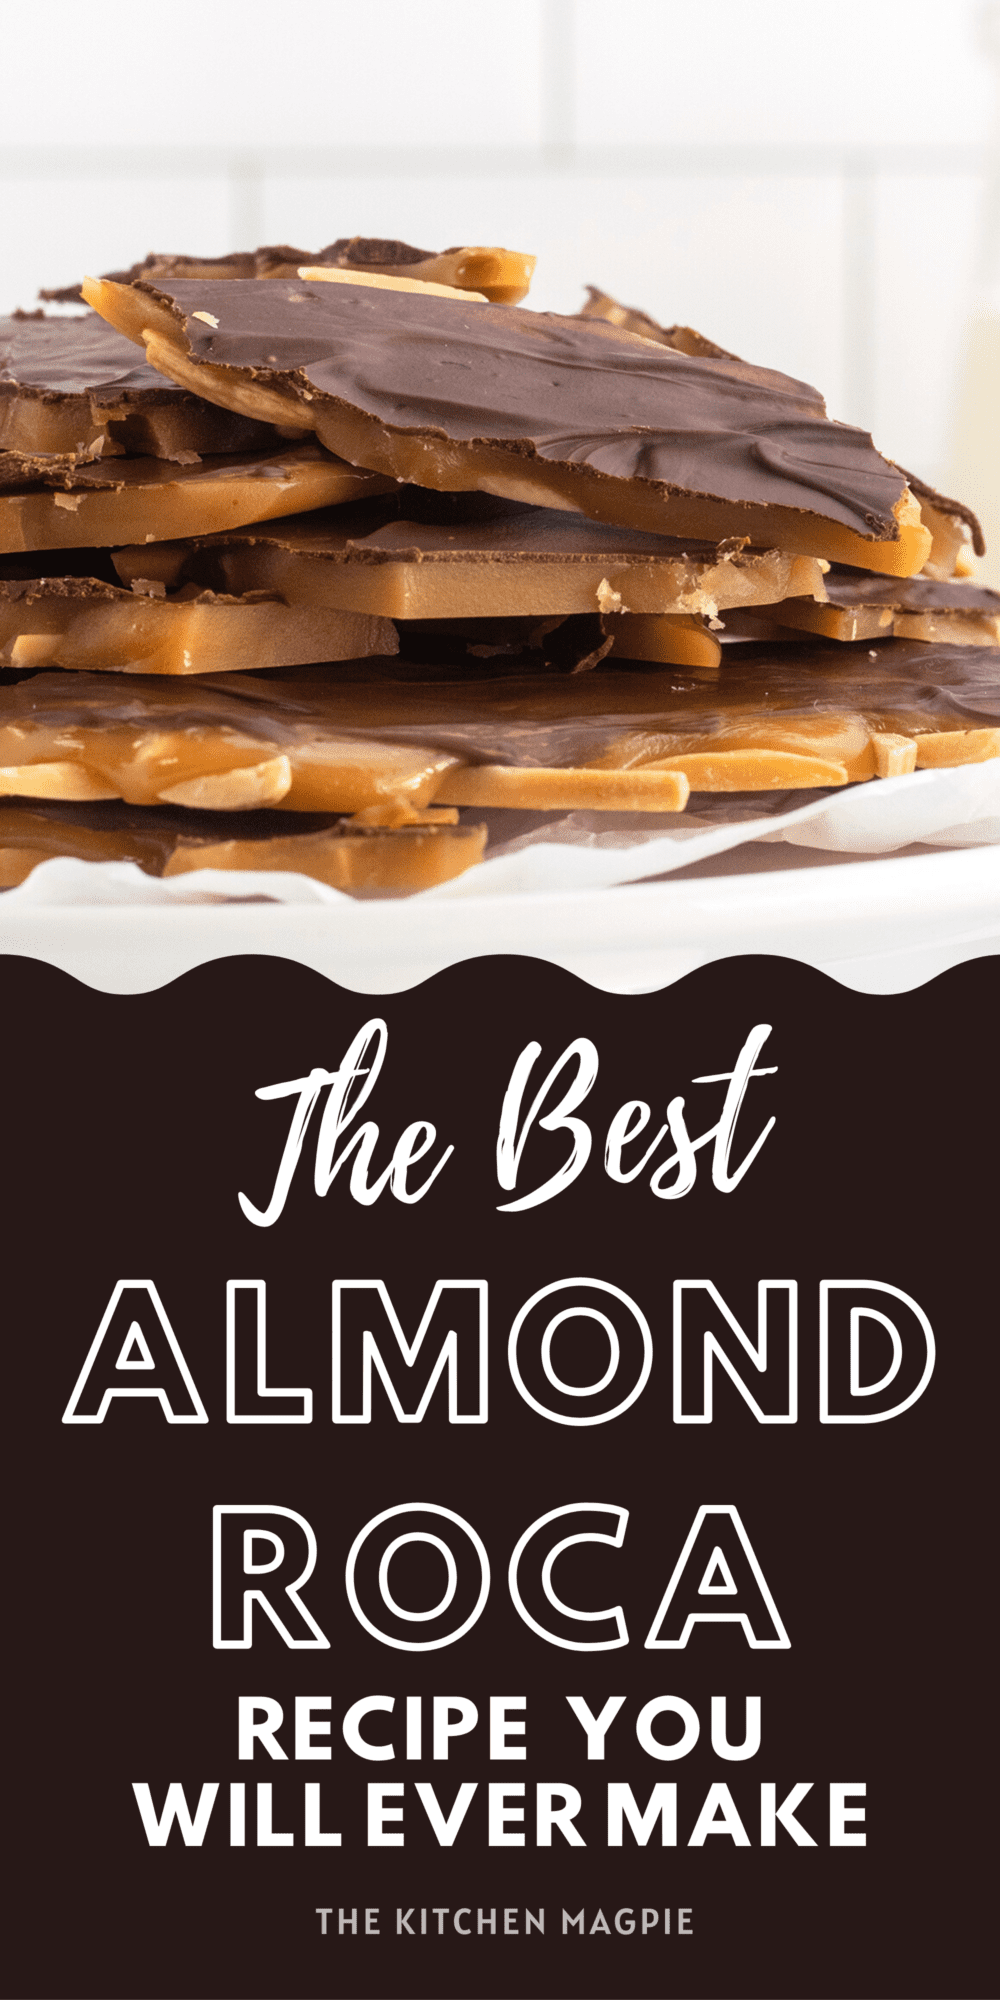 This almond Roca is a buttery hard toffee with almonds that is covered in a rich chocolate, sure to satisfy your sweet cravings.